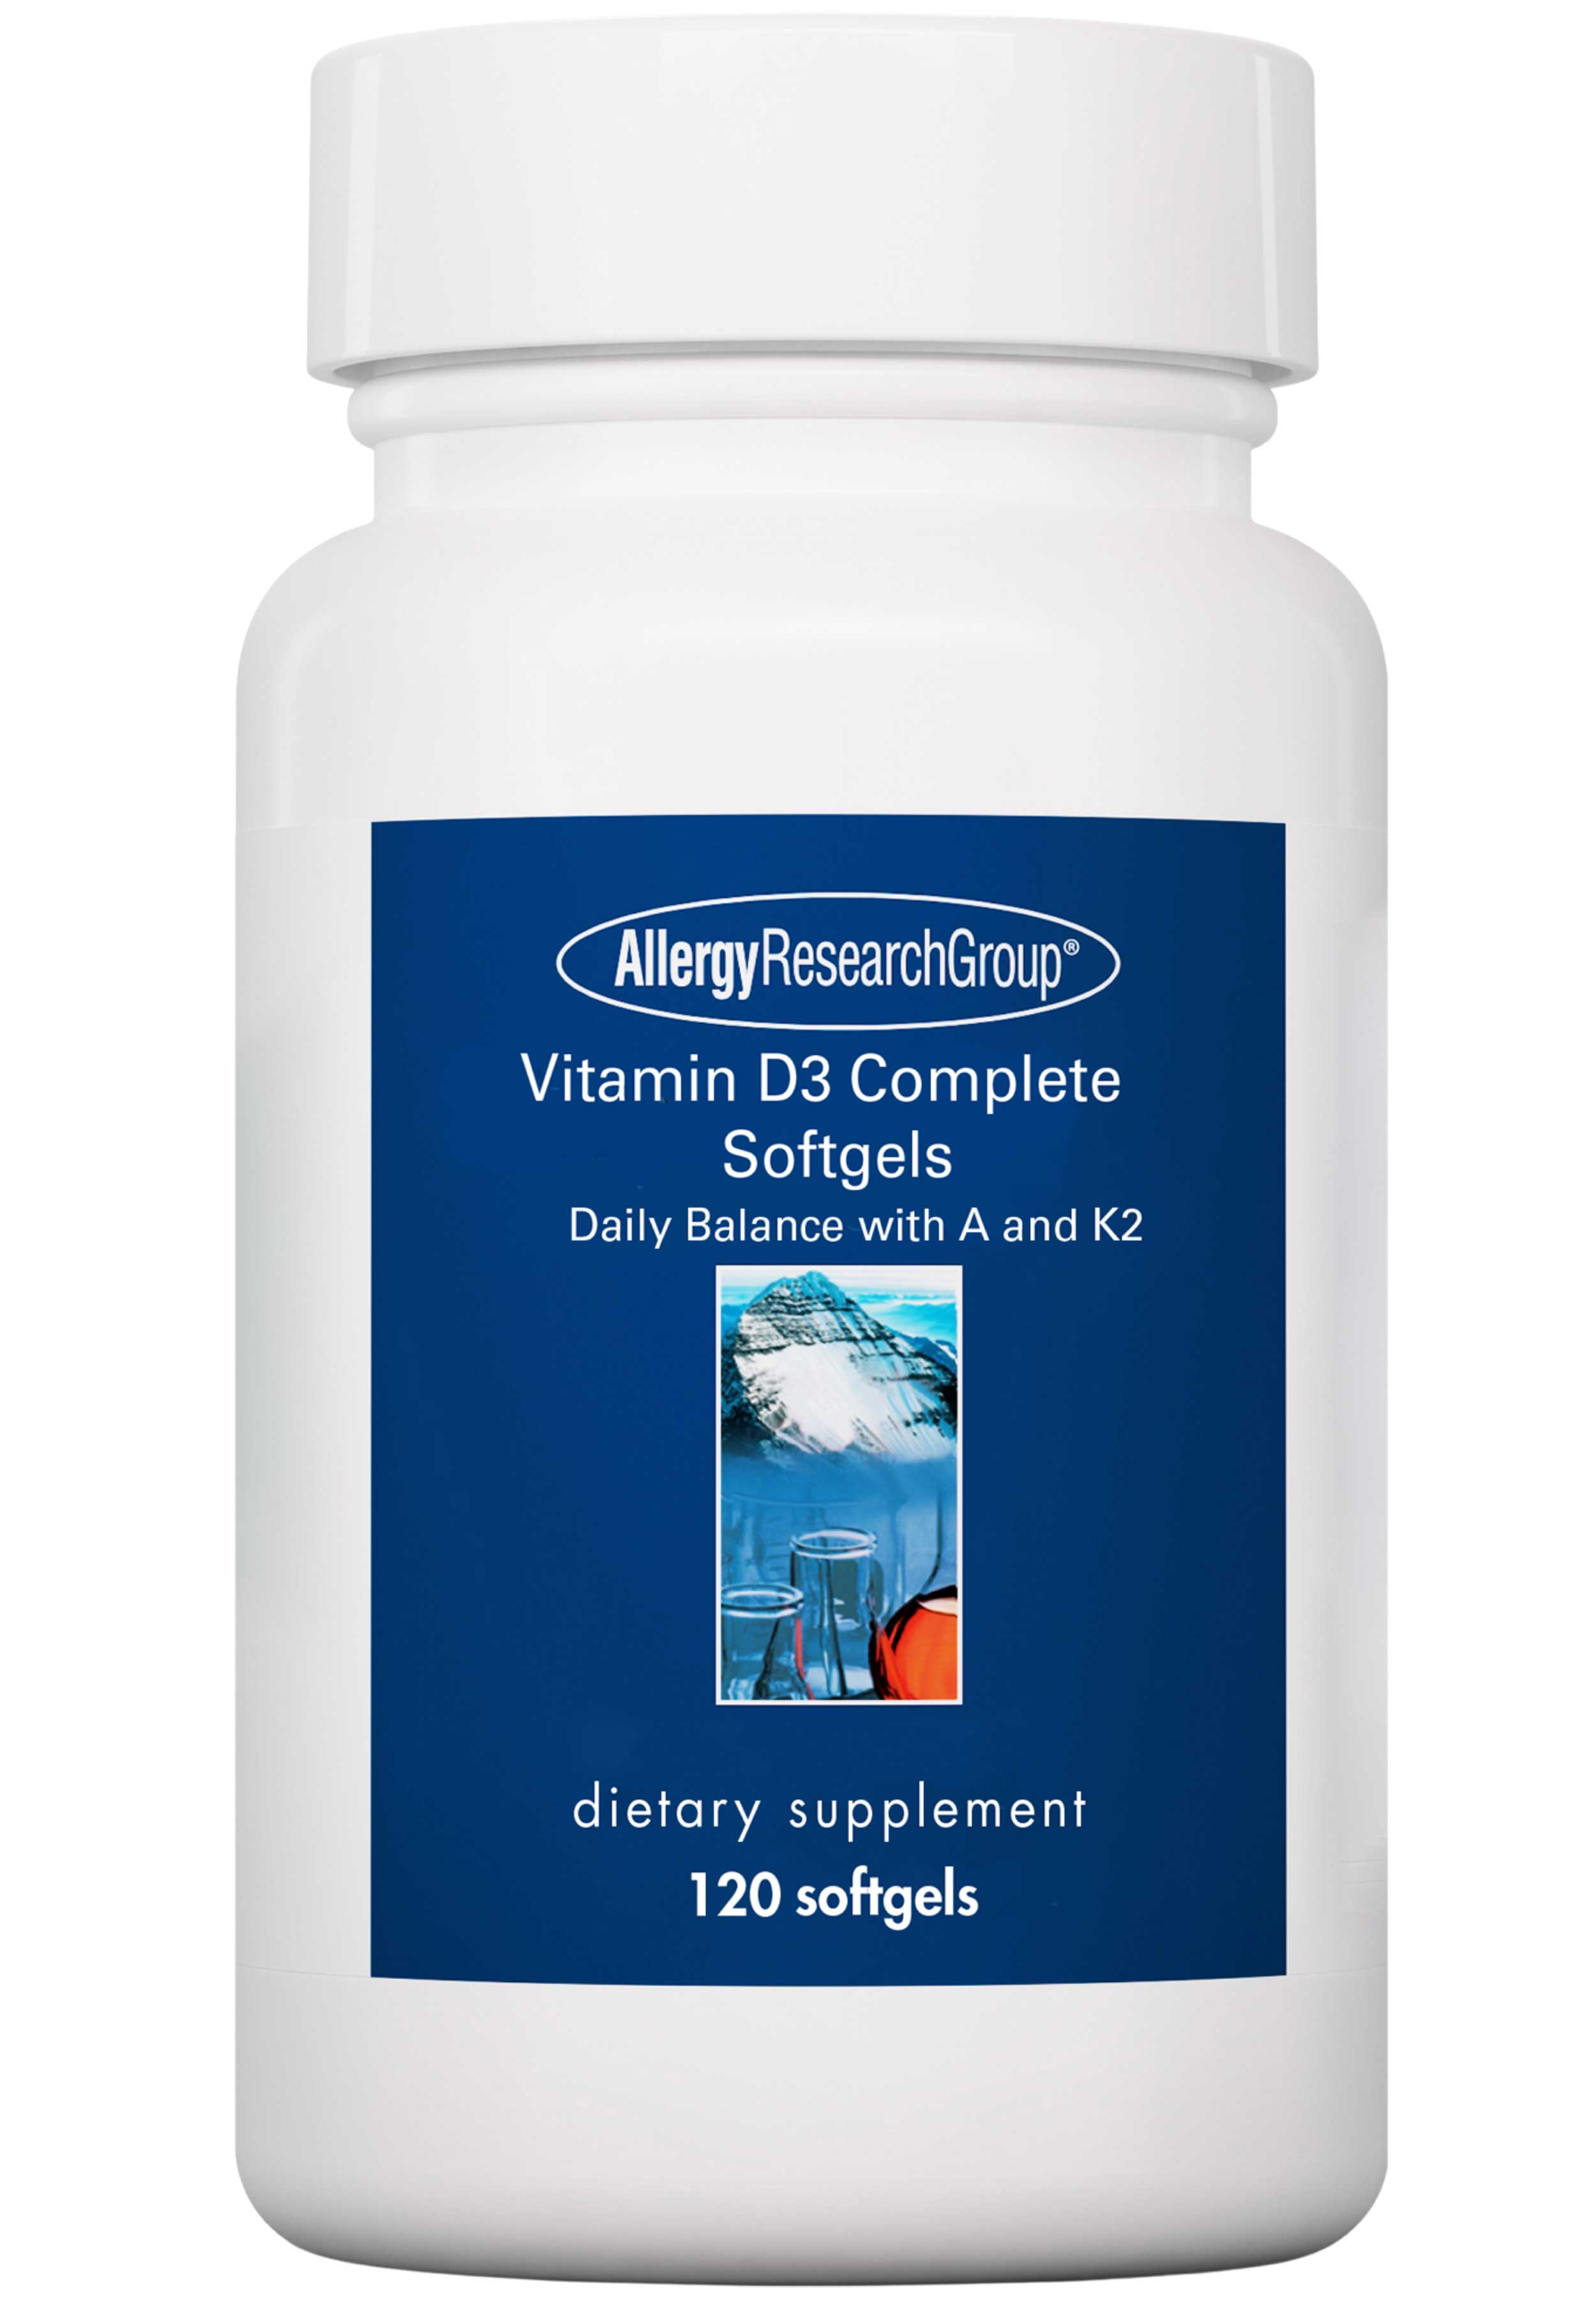 Allergy Research Group Vitamin D3 Complete Softgels